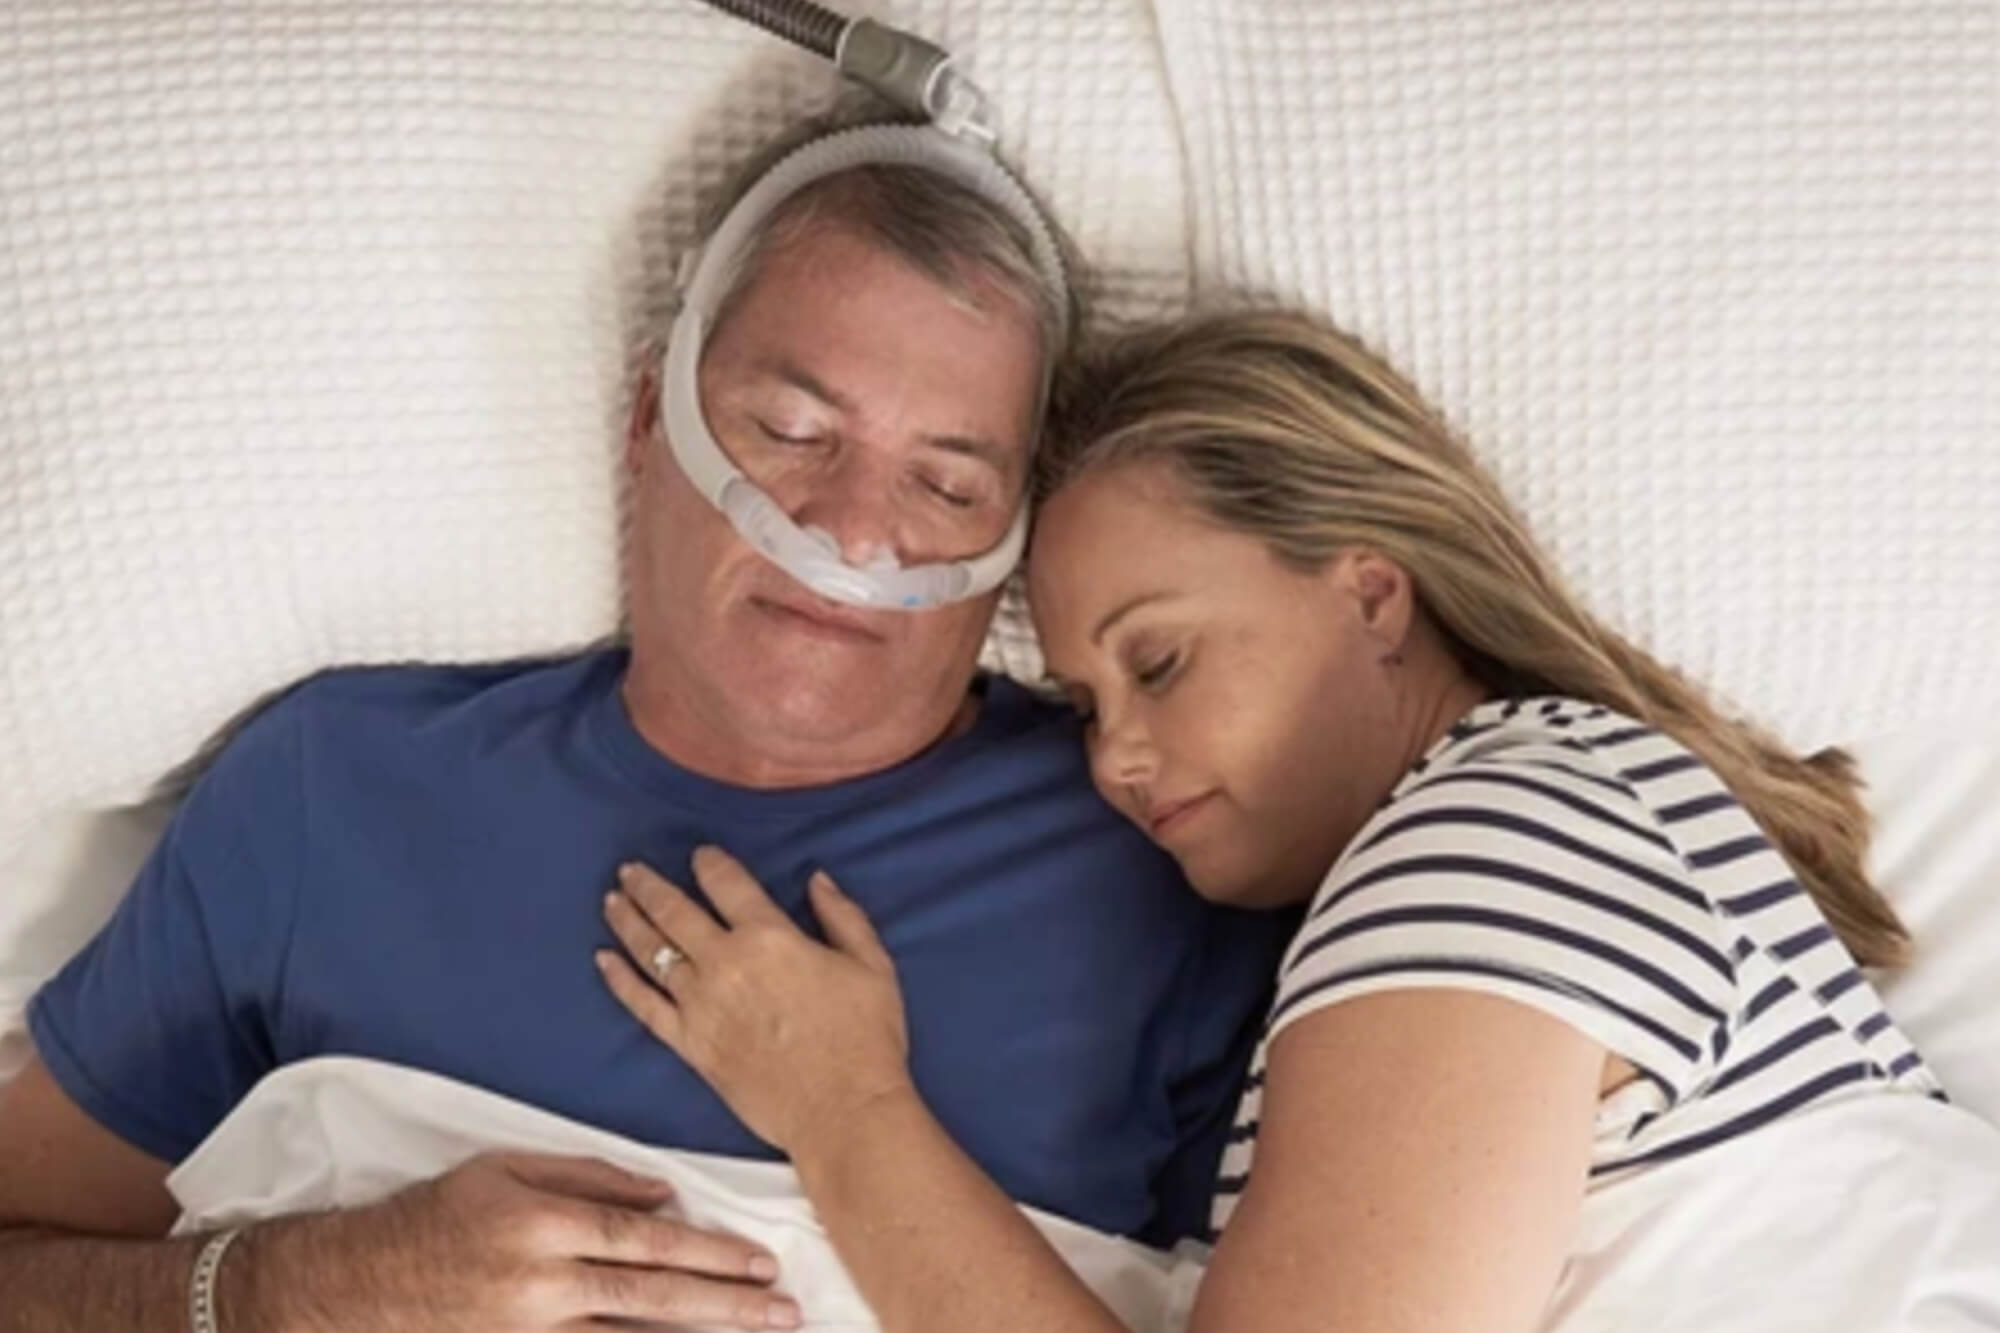 Couple Sleeping in Bed With Woman Cuddling Man While Sleeping With Nose Pillows CPAP Mask